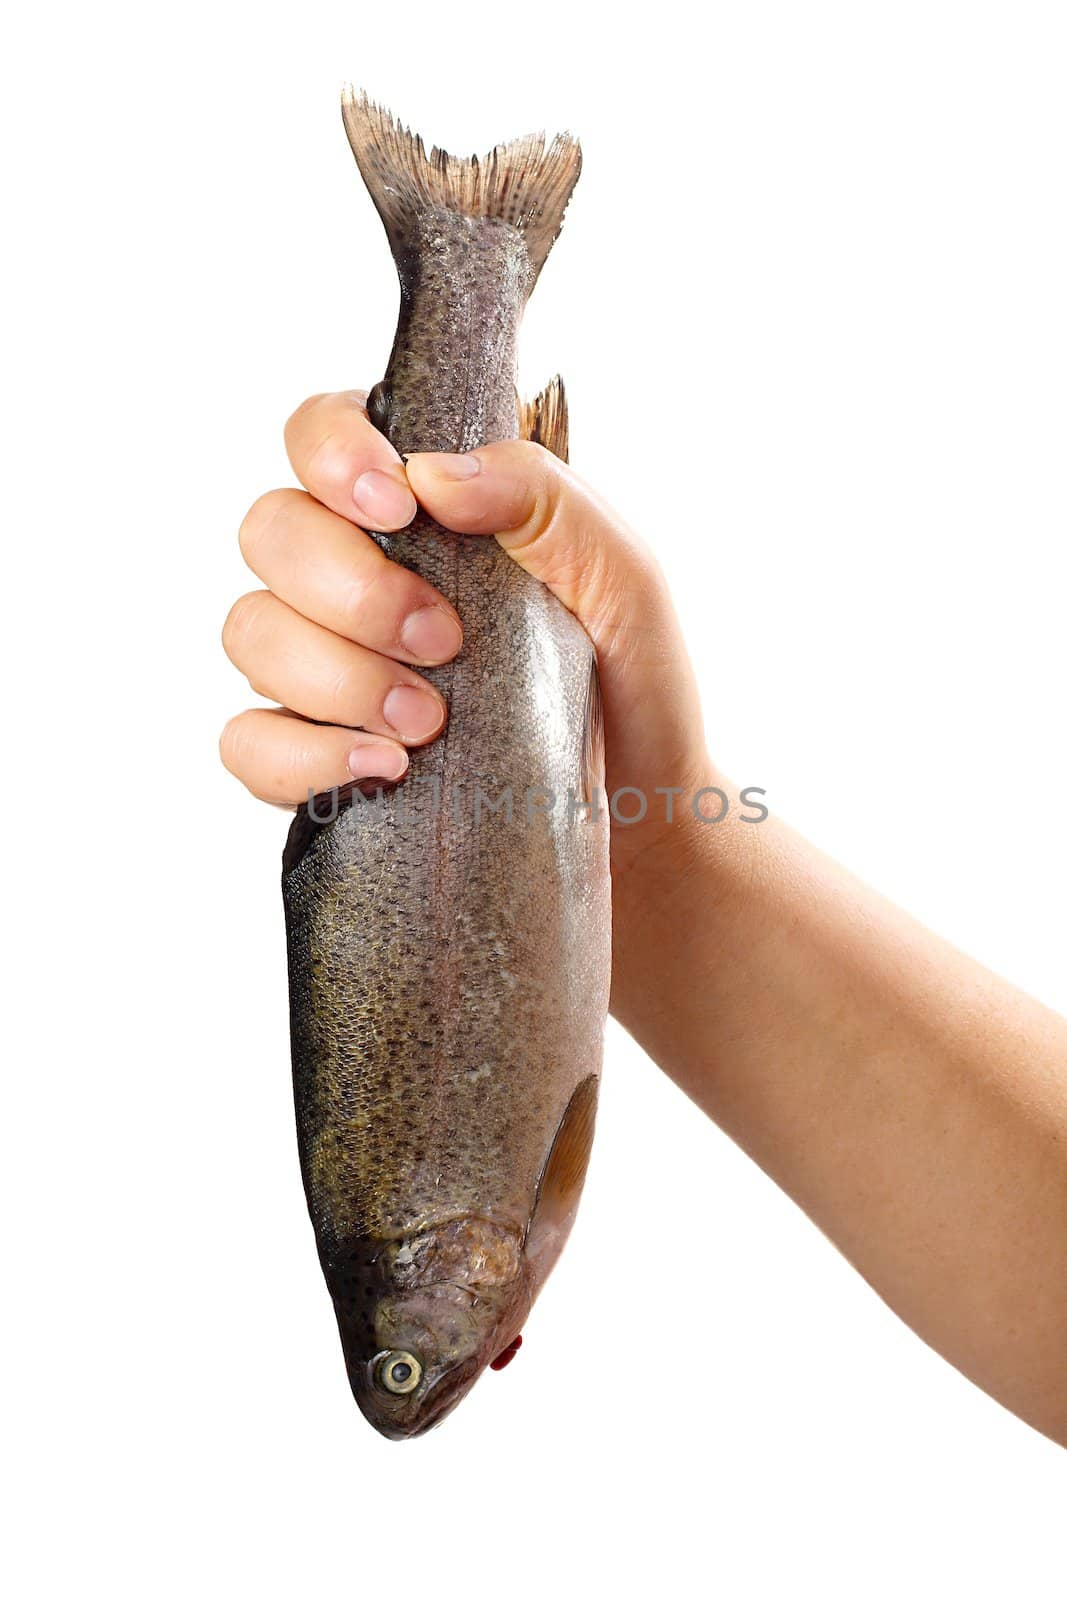 Holding a raw fish isolated on white background